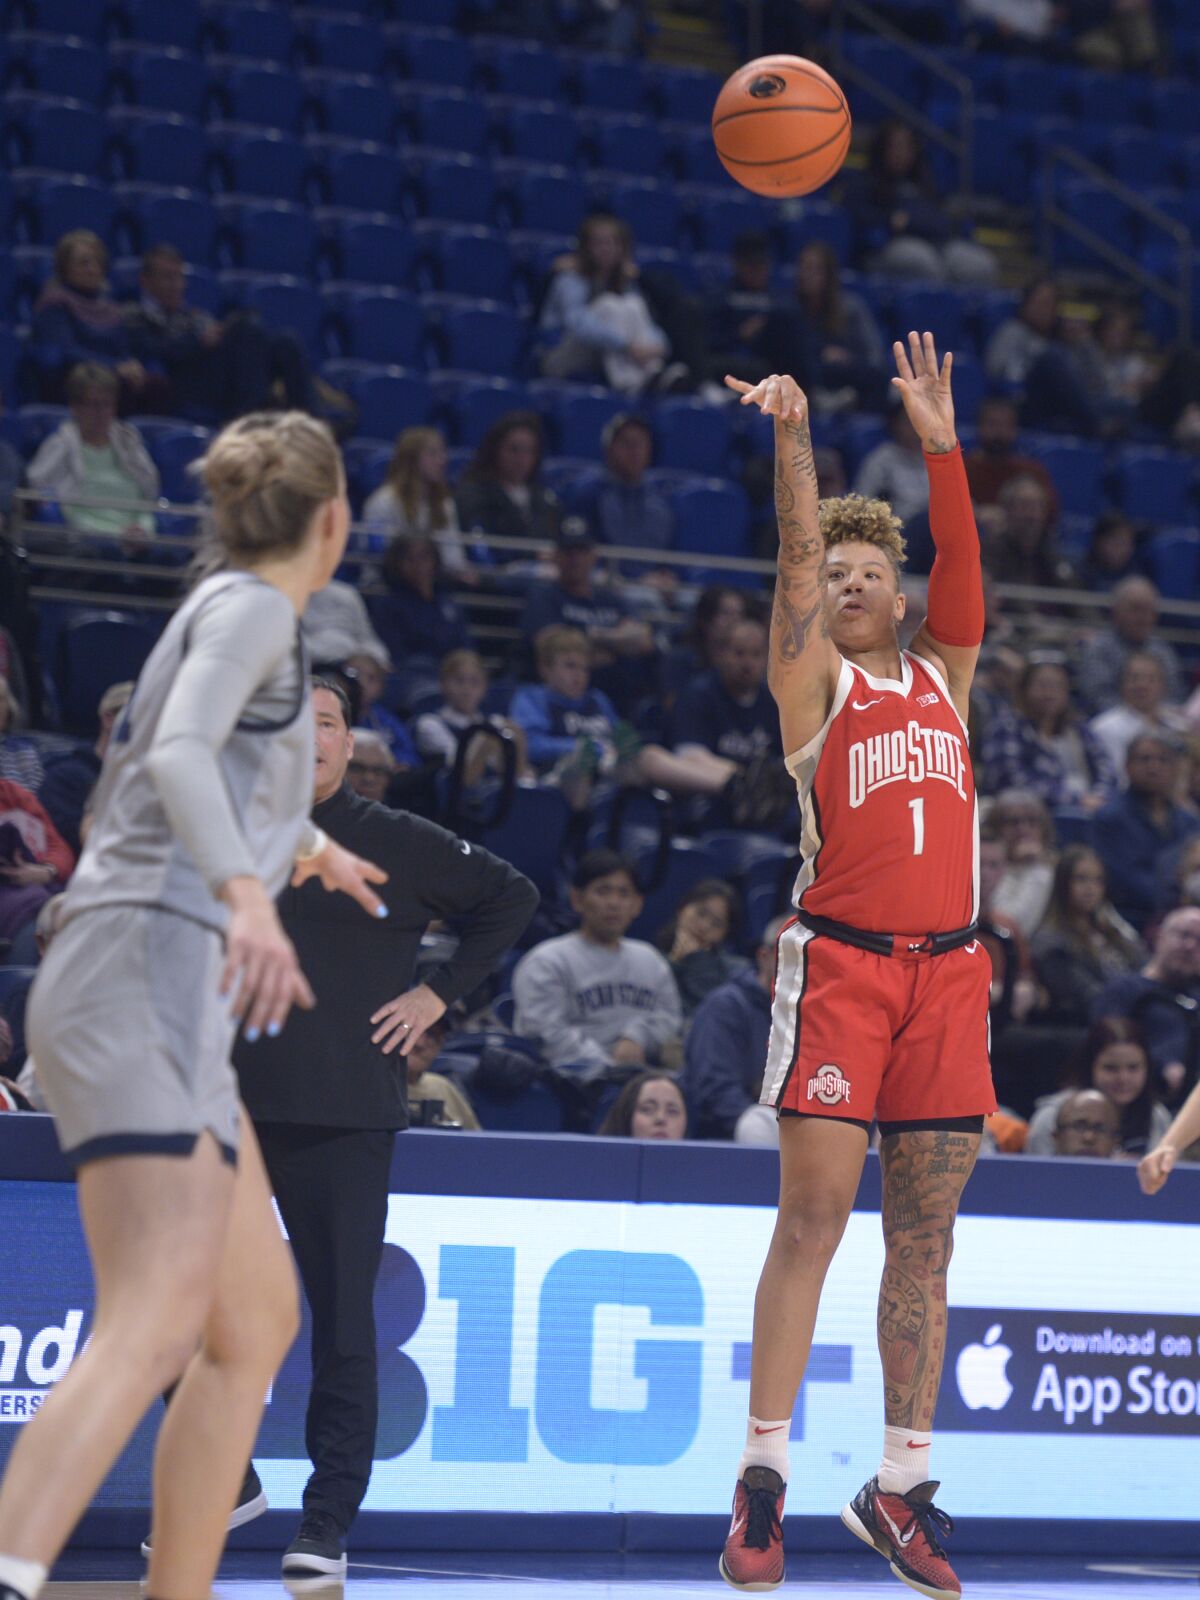 Ohio State's Rikki Harris (1) shoots a long 3-point basket against Penn State during the second half of an NCAA college basketball game, Thursday, Feb. 16, 2023, in State College, Pa. (AP Photo/Gary M. Baranec)